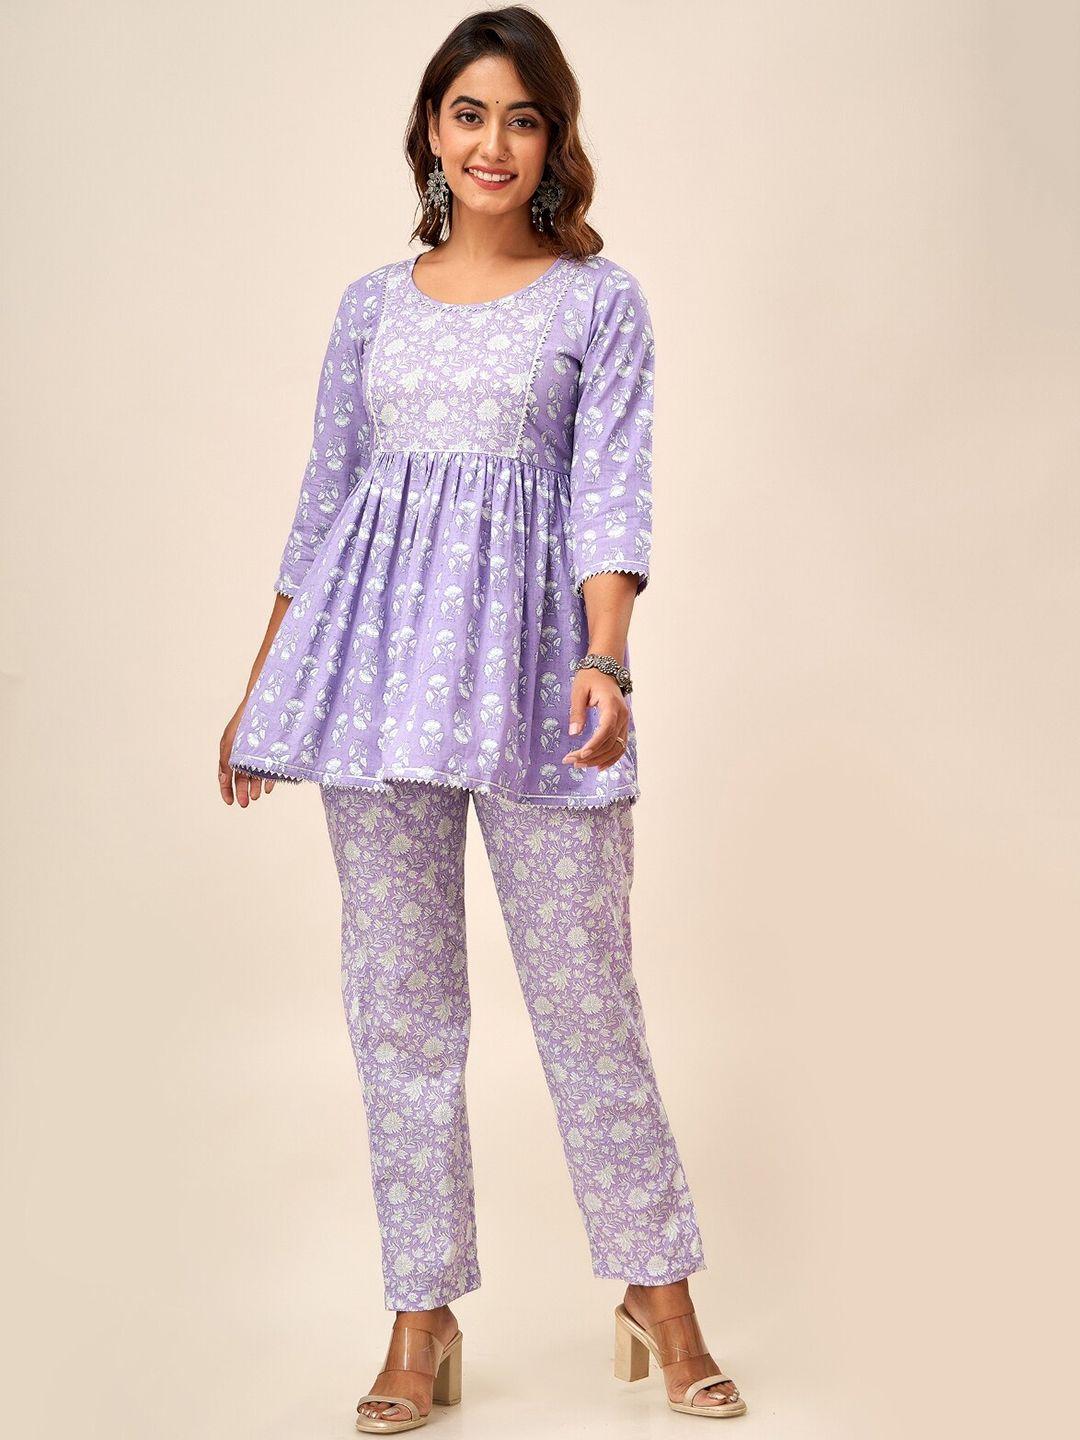 svarchi floral printed gotta patti detailed pure cotton a-line kurti with trouser